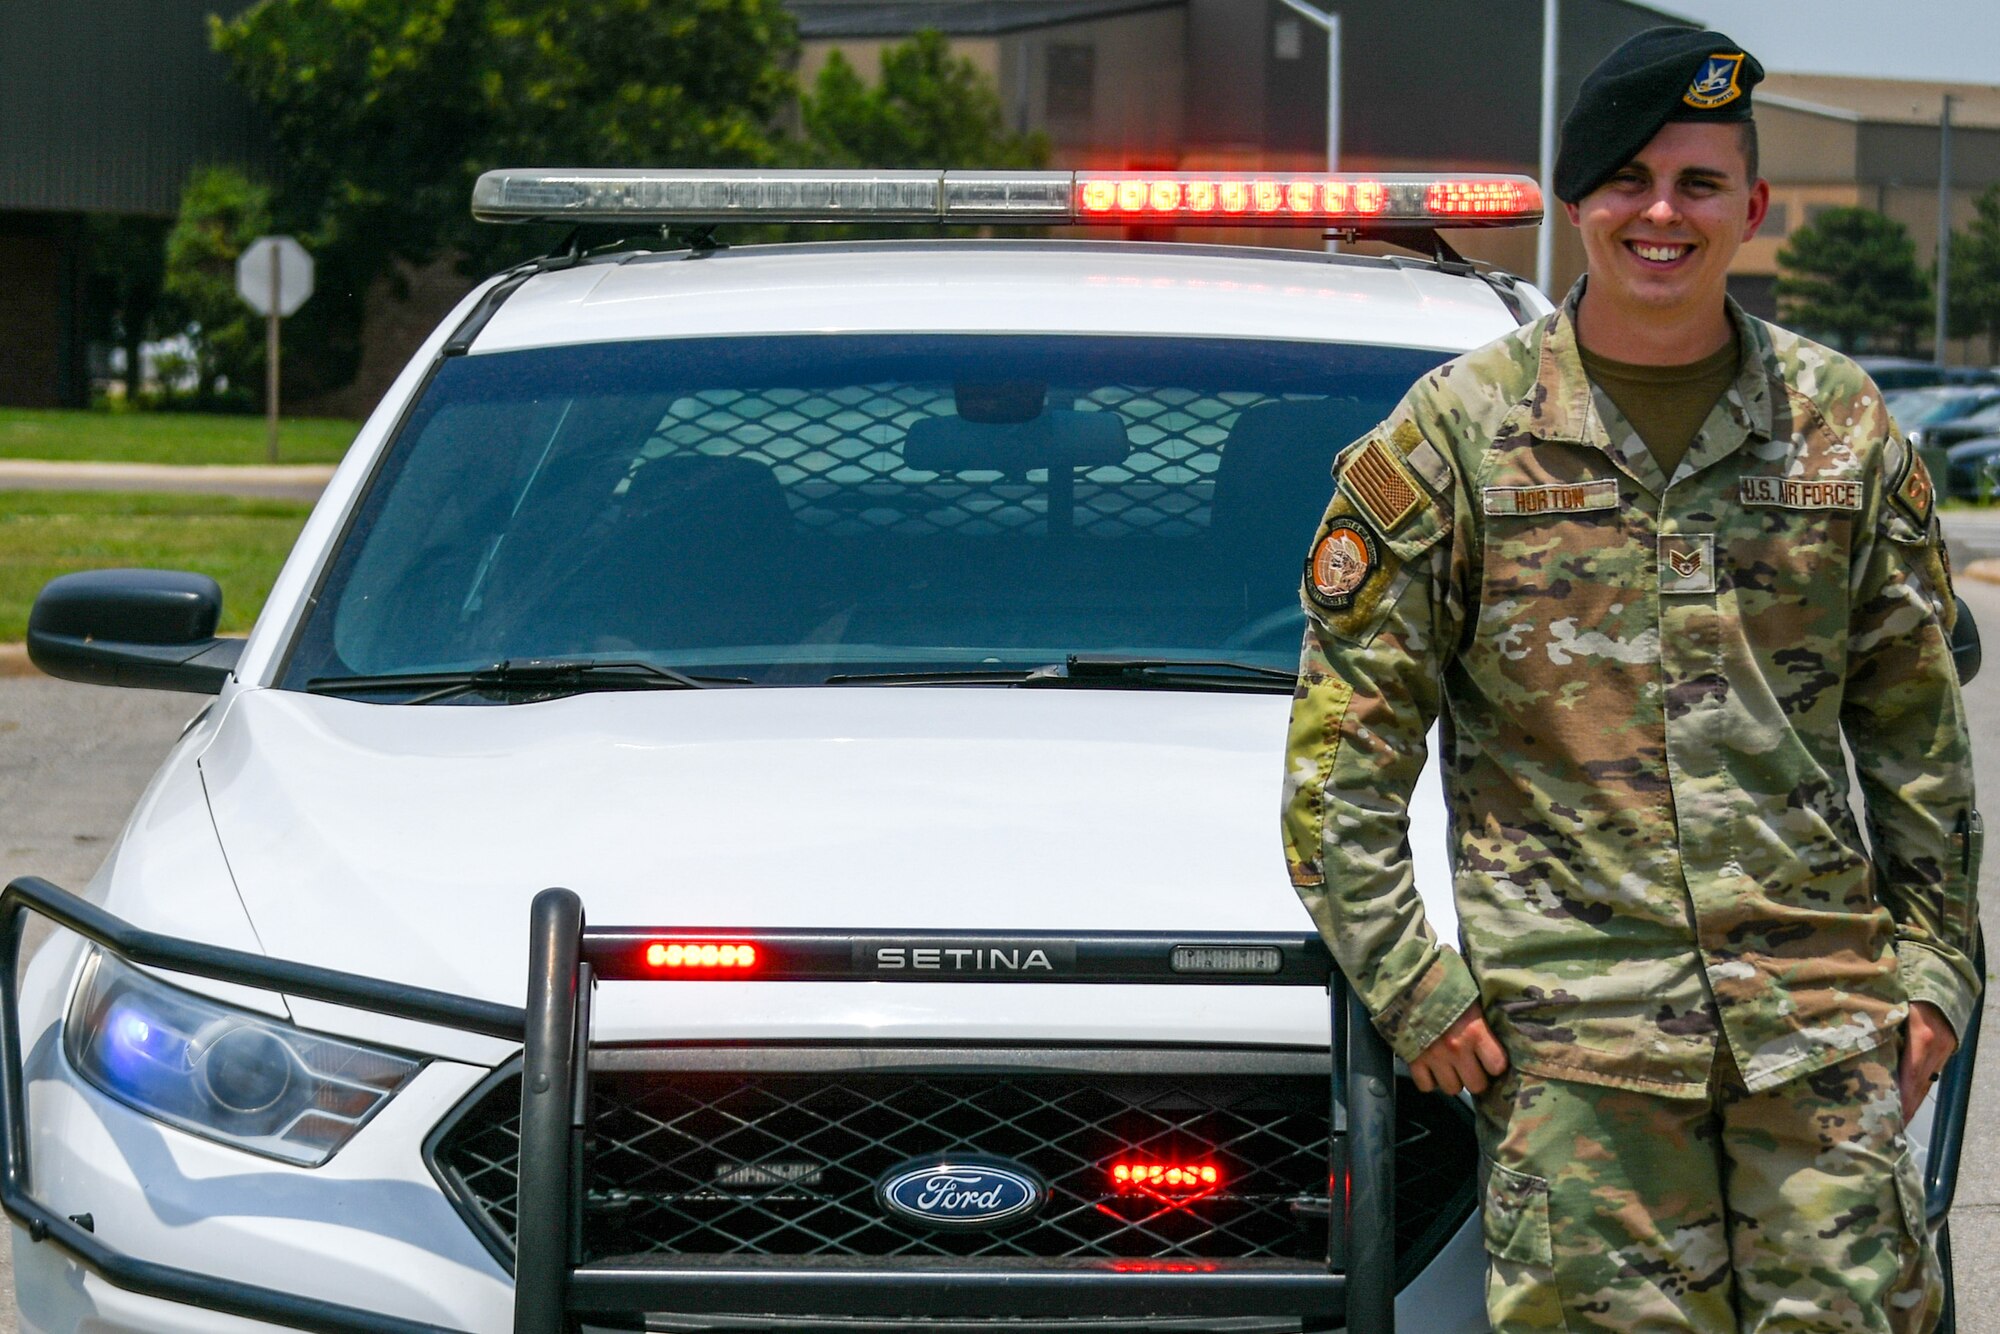 U.S. Air Force Staff Sgt. Zachary Horton, 97th Security Forces unit training manager, poses for a photo in front of a patrol car at Altus Air Force Base, Oklahoma, June 22, 2023. Horton reenlisted in 2022 to explore new places, build his career, and
acquire invaluable skills. (U.S. Air Force photo by Airman 1st Class Miyah Gray)